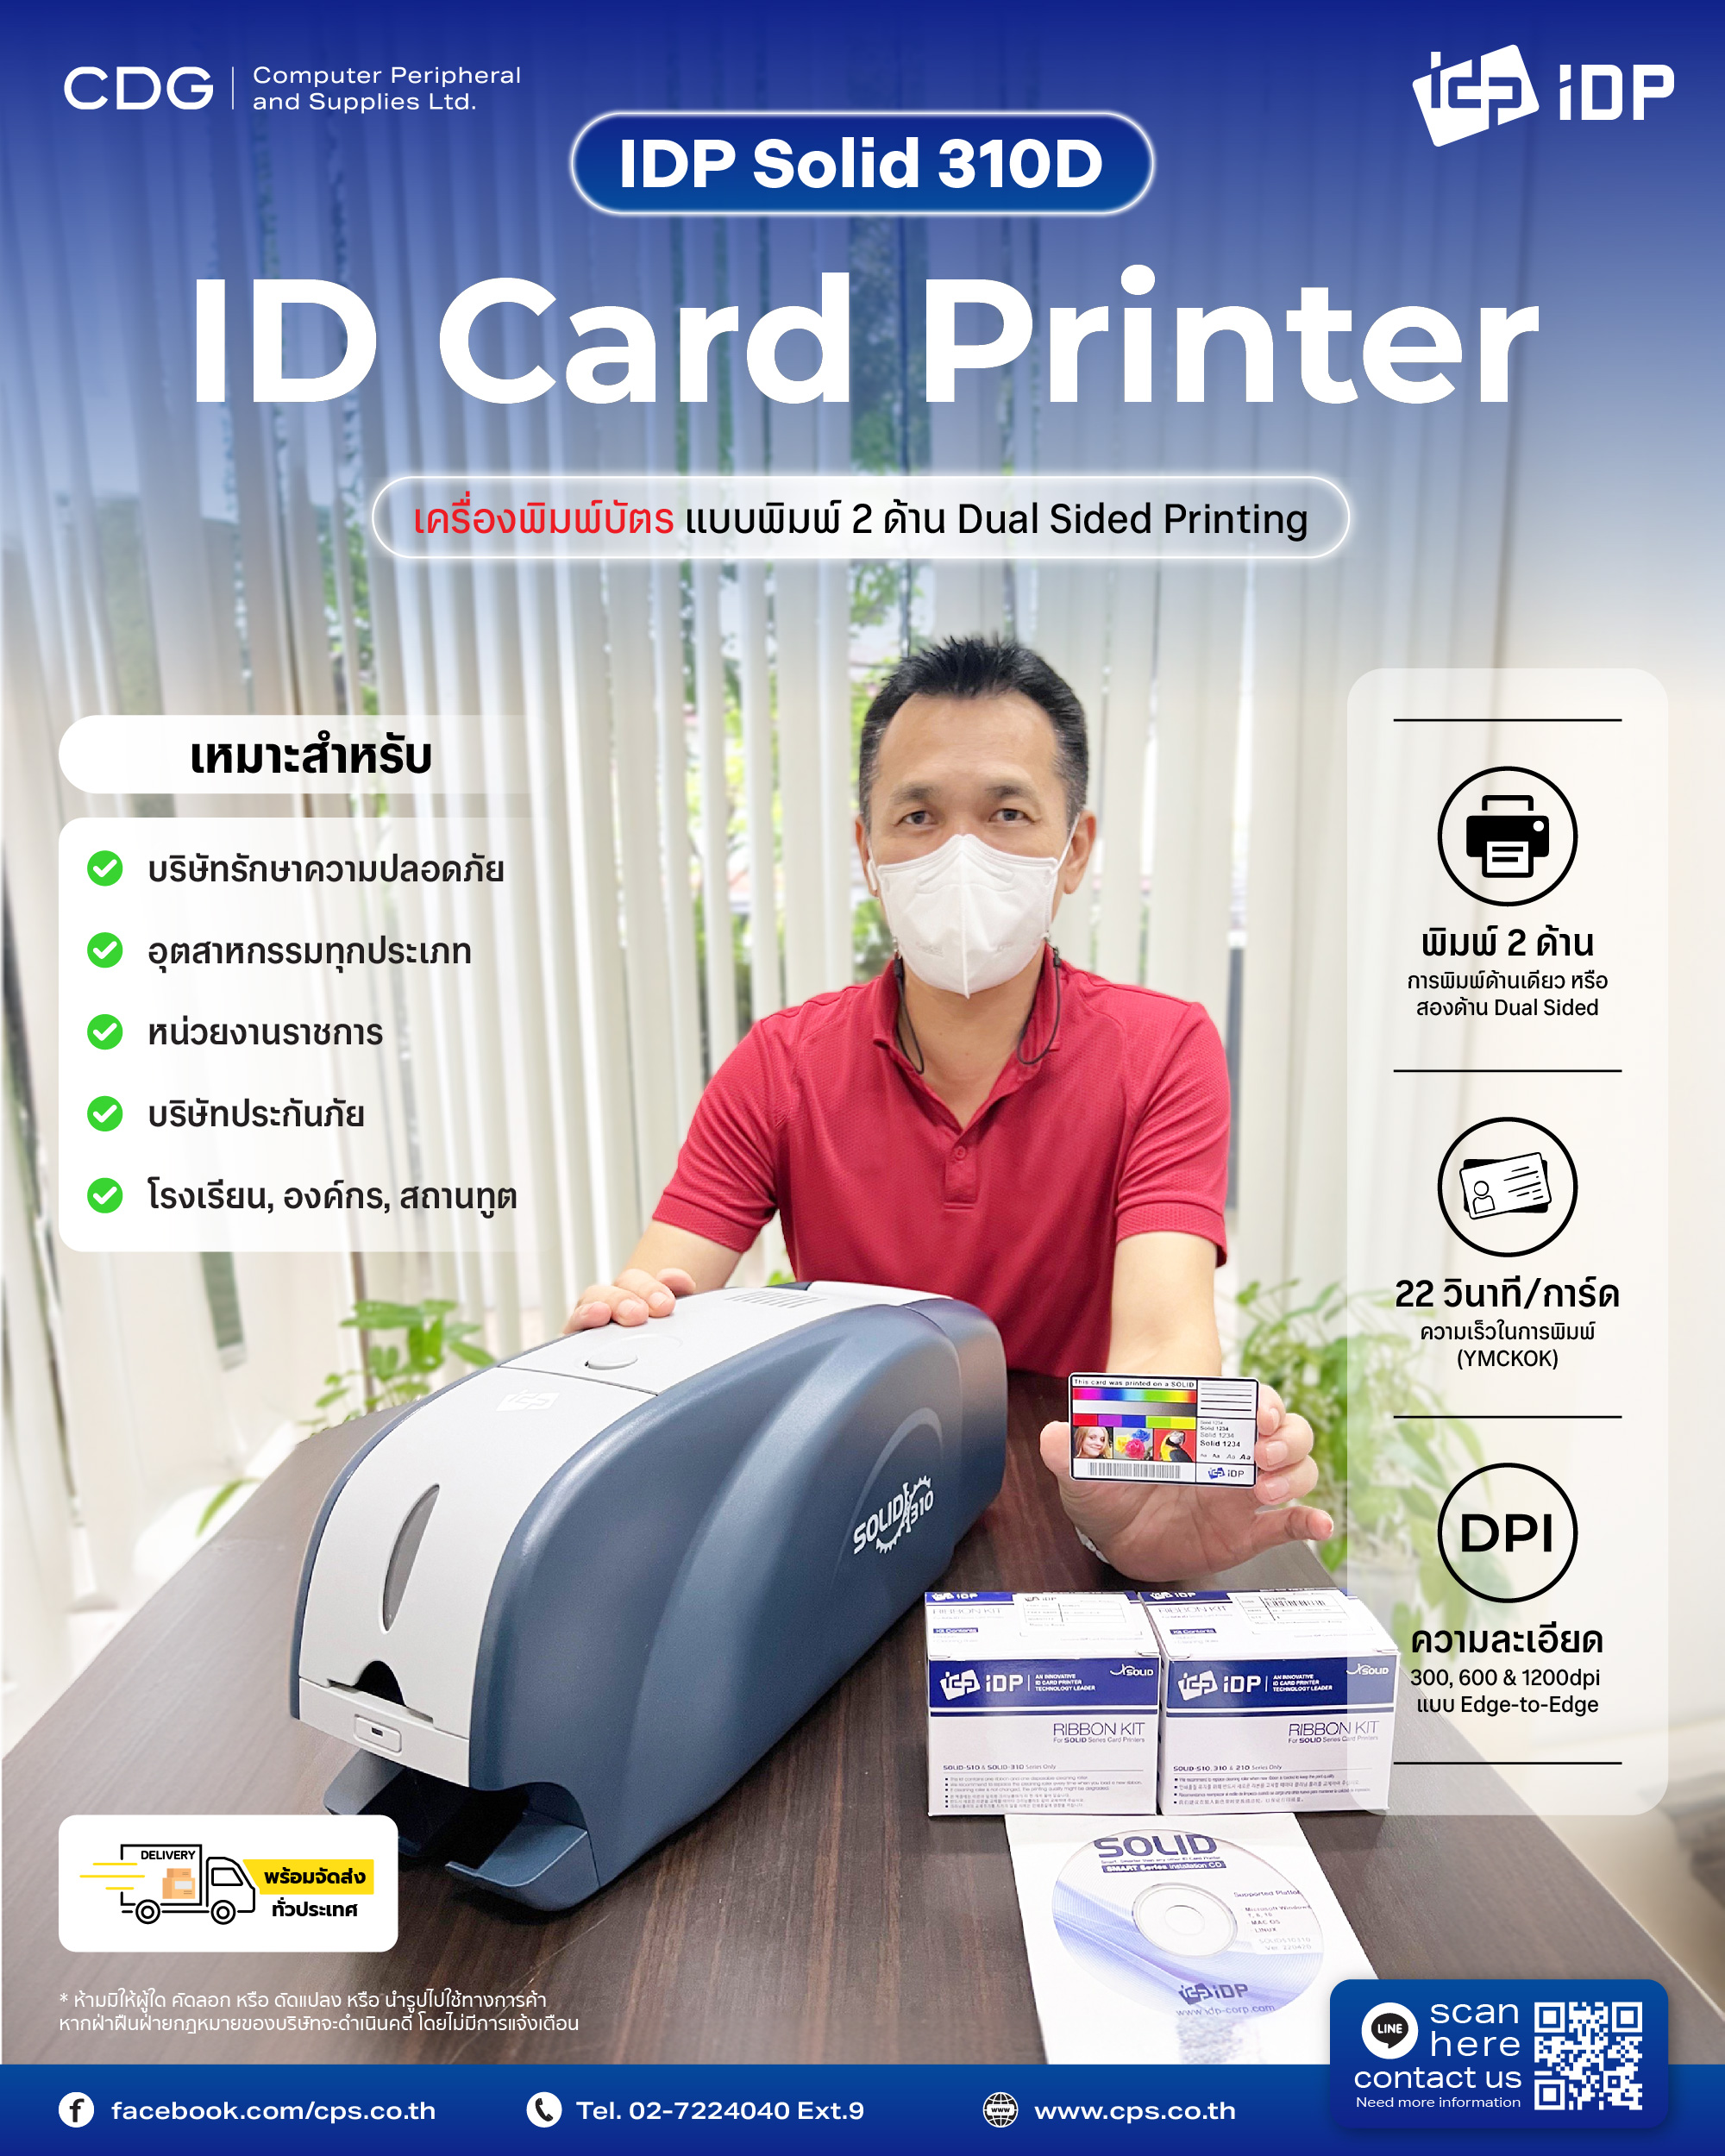 IDP Solid 310 Series Single or Dual Sided Printing